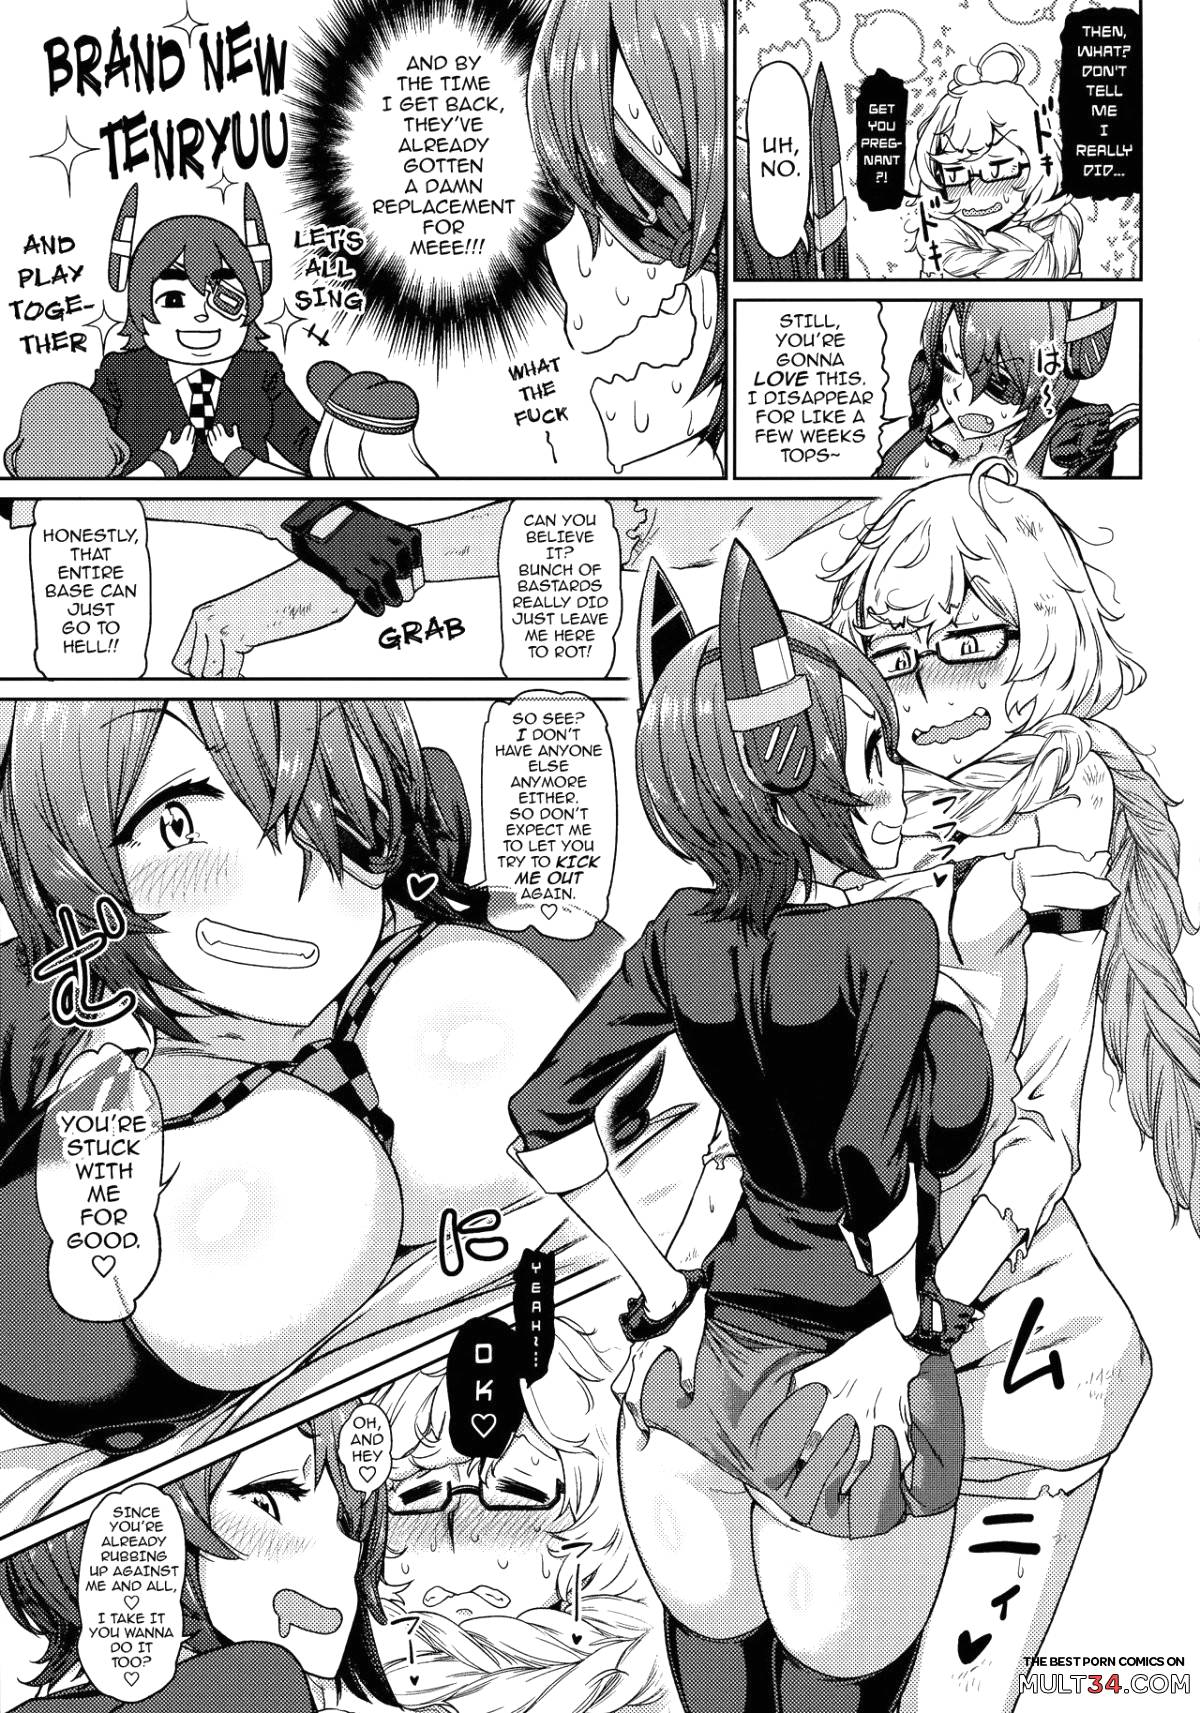 I Told You Supply Depot, This Tenryuu Belongs to You!! page 45